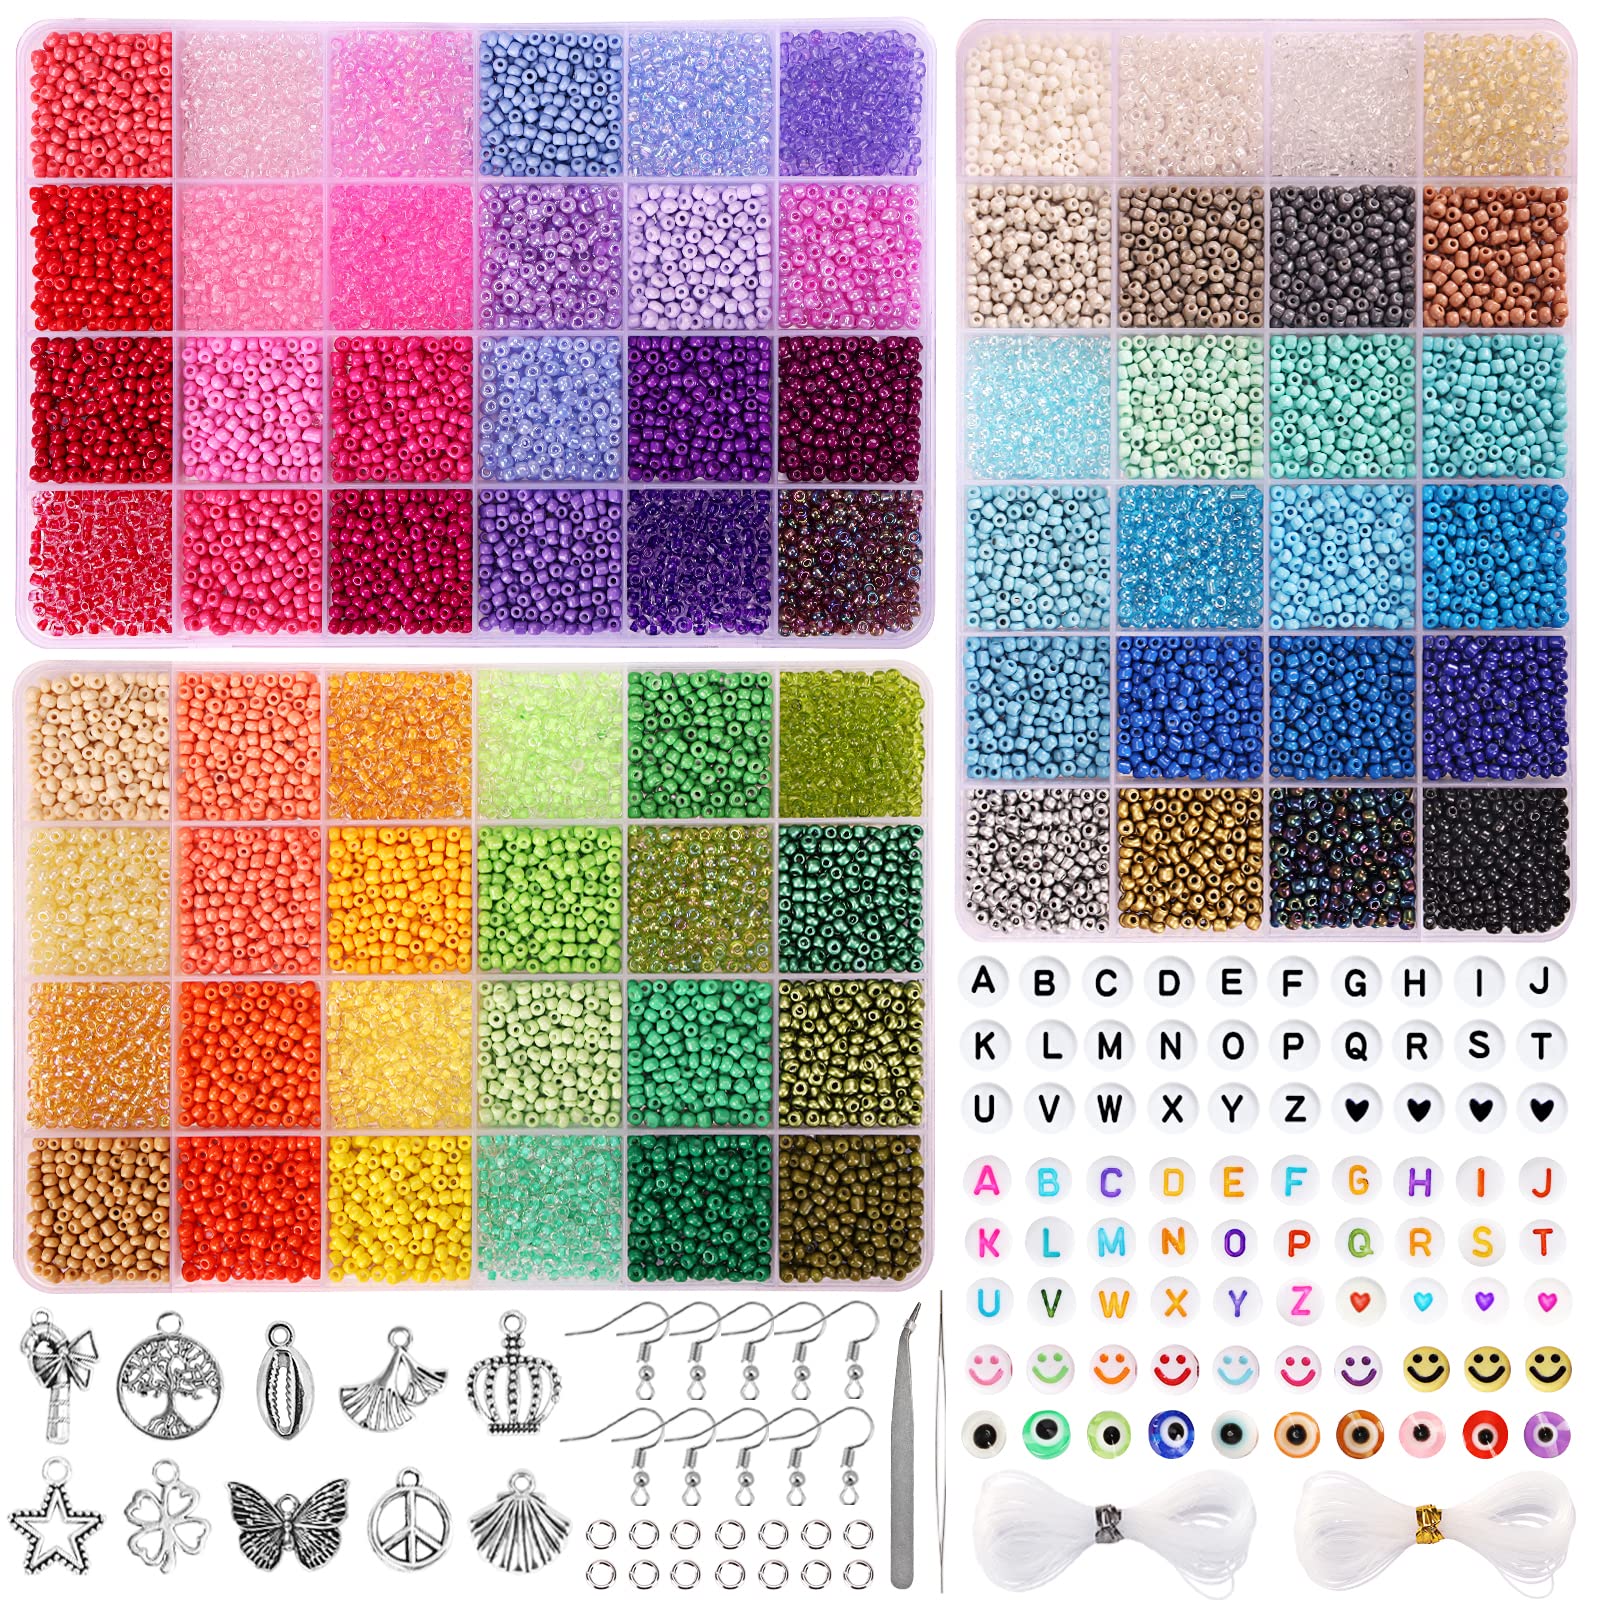 QUEFE 14400pcs 72 Colors 3mm Glass Seed Beads for Bracelet Making Kit Small  Beads for Jewelry Making with Letter Beads for Crafts Gifts